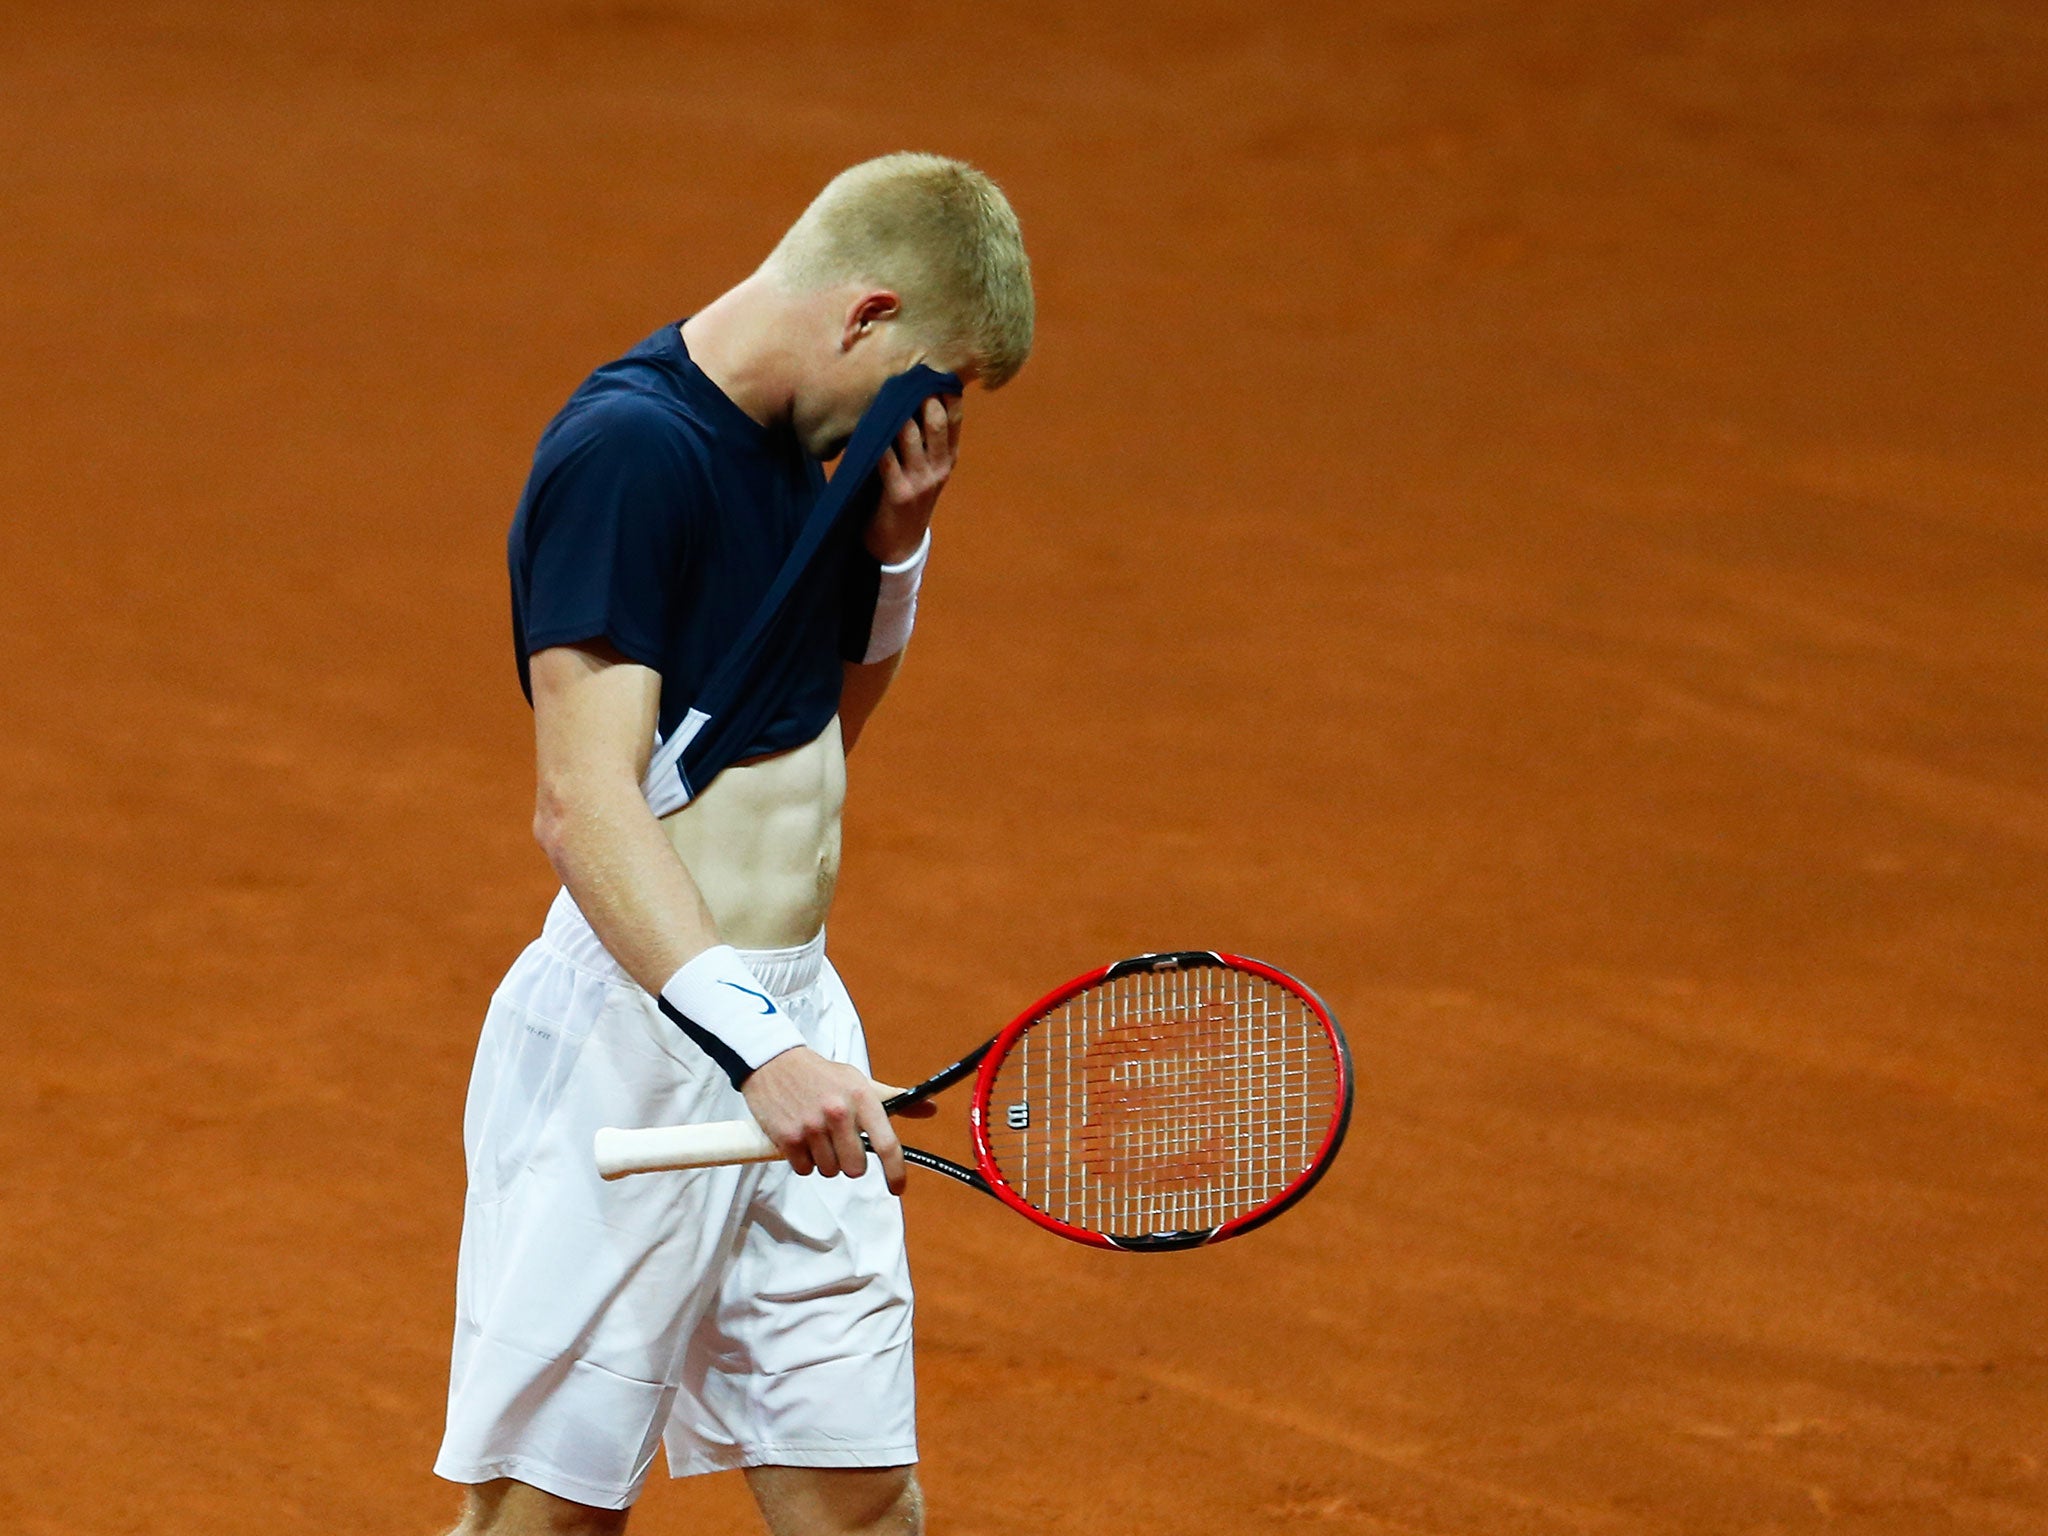 Kyle Edmund reacts after suffering a five-set loss to David Goffin in the Davis Cup final